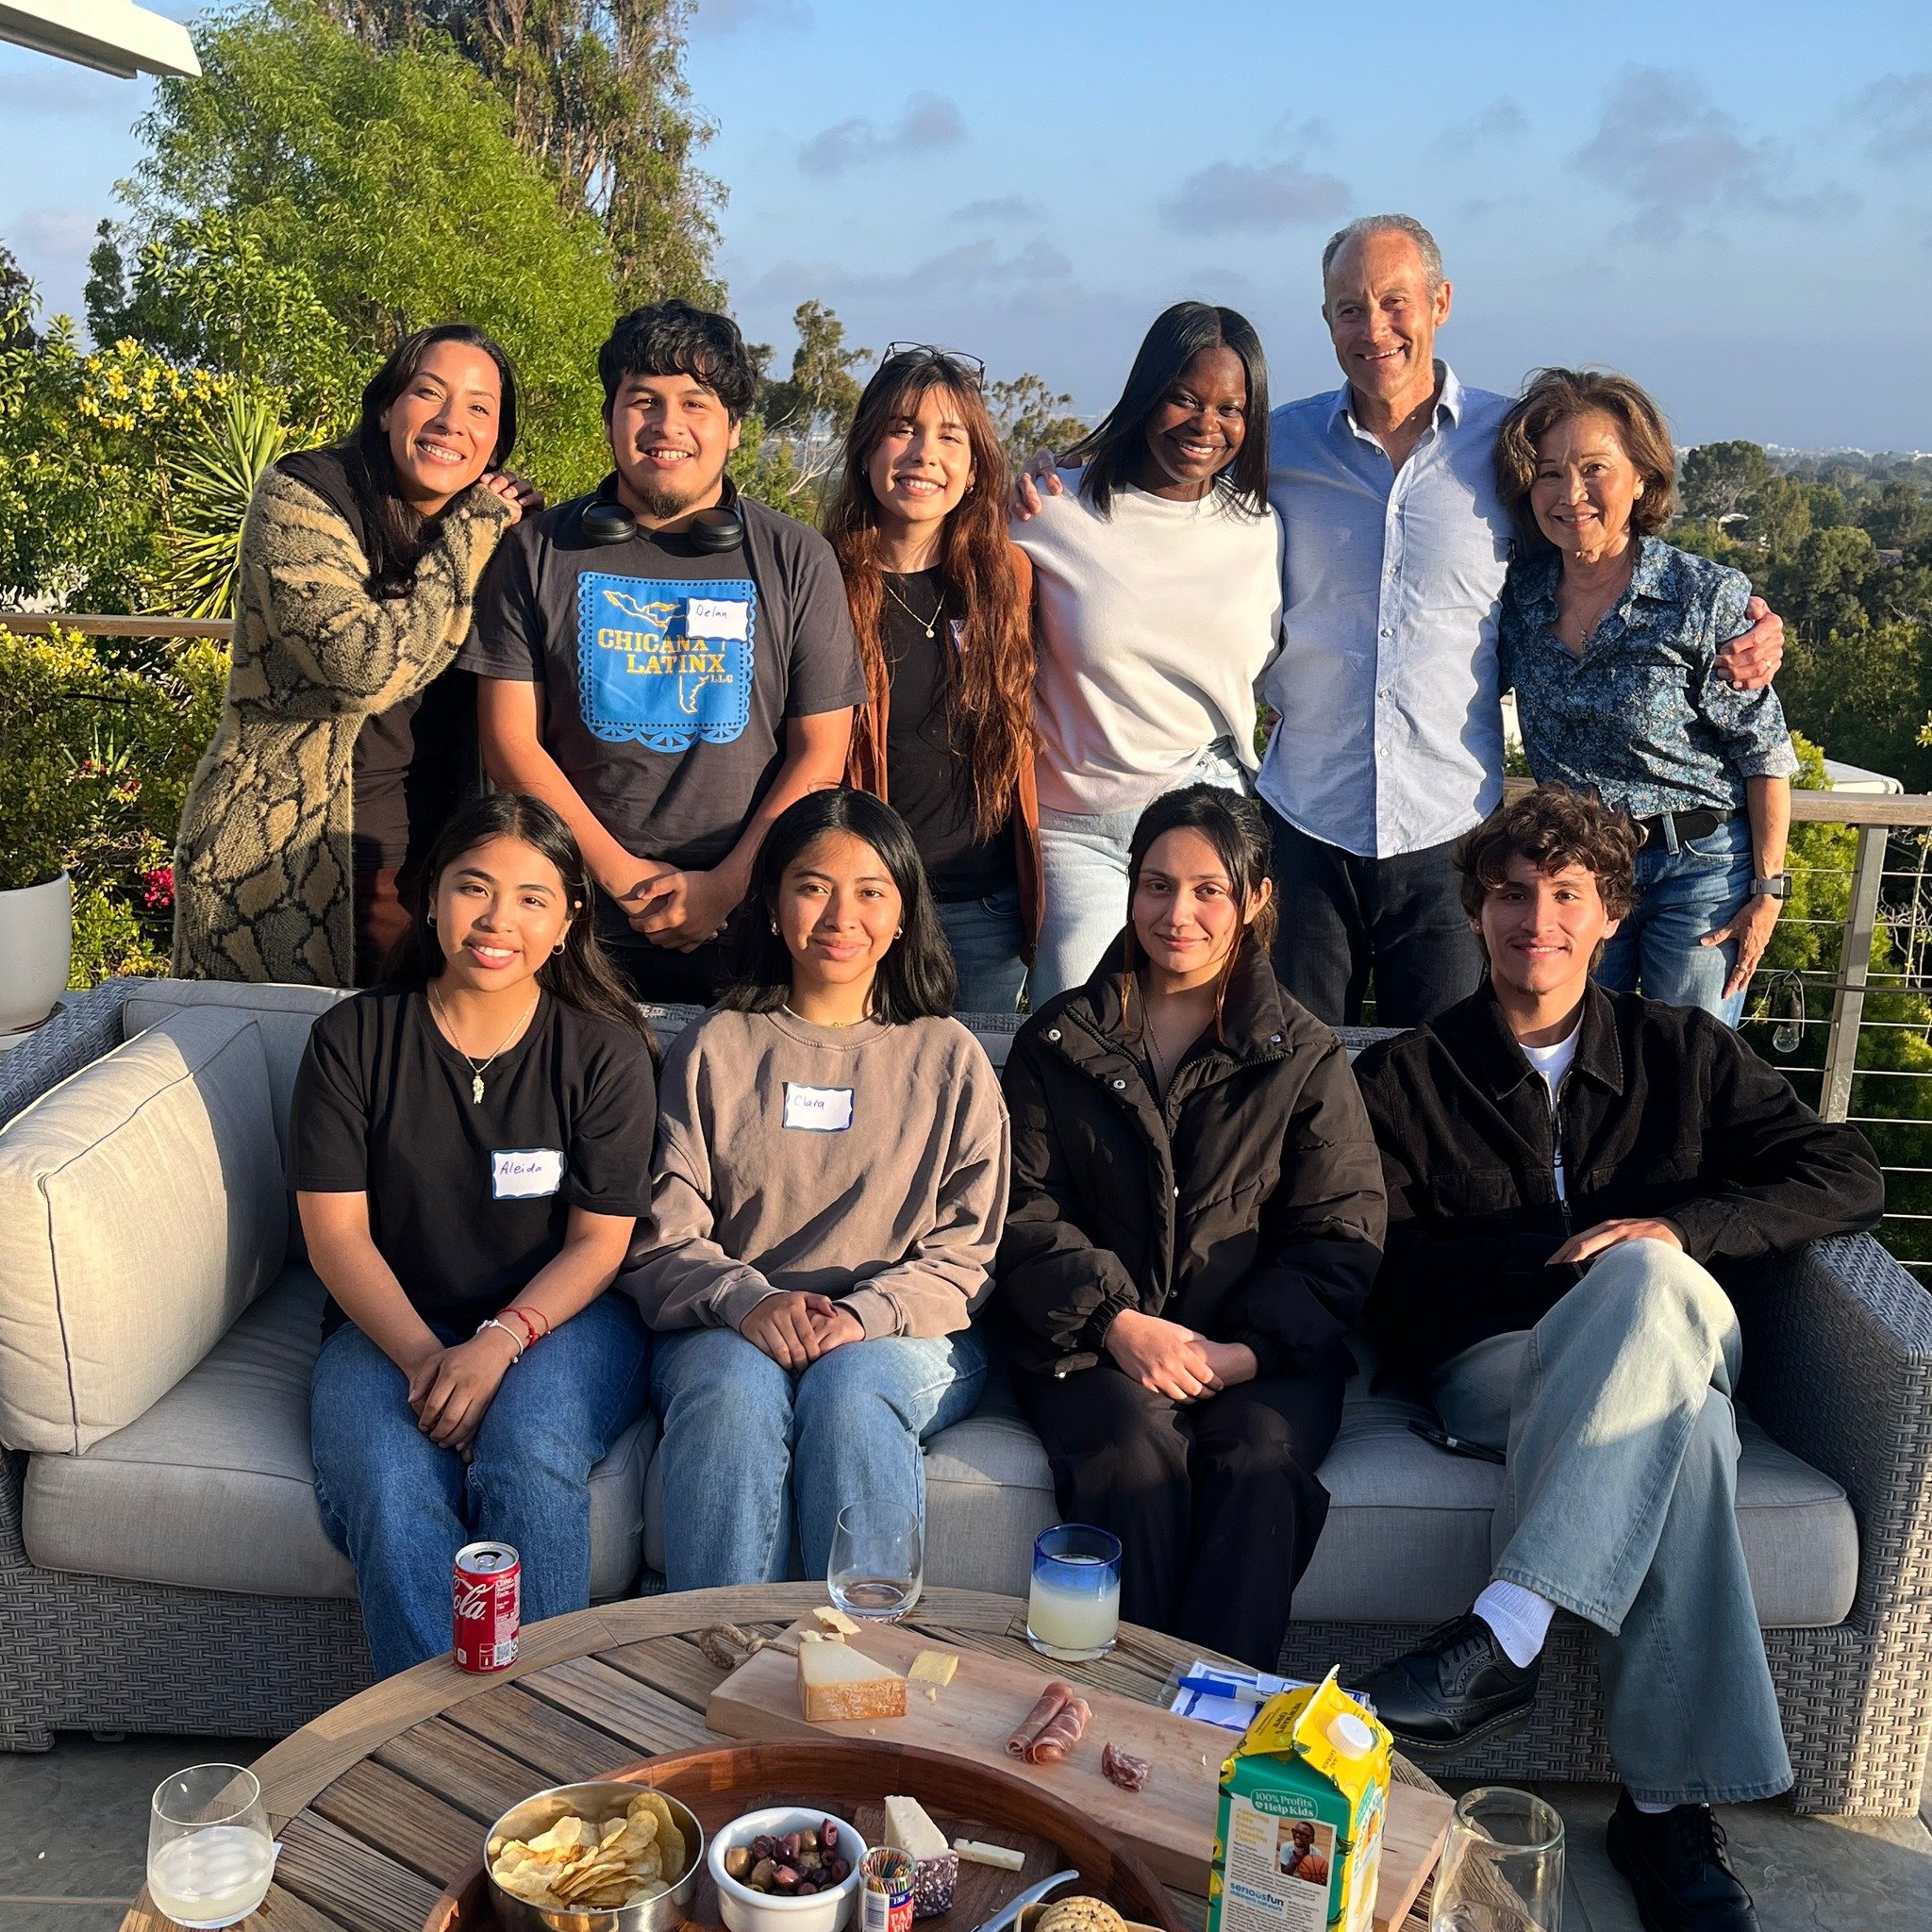 Thank you to board member (and UCLA alum) Roy Longman and his wife for hosting our @UCLA College Crews and C5 staff in their lovely home! 

C5 Leaders, alum and staff were able to connect over snacks and share insights into what college life is like 